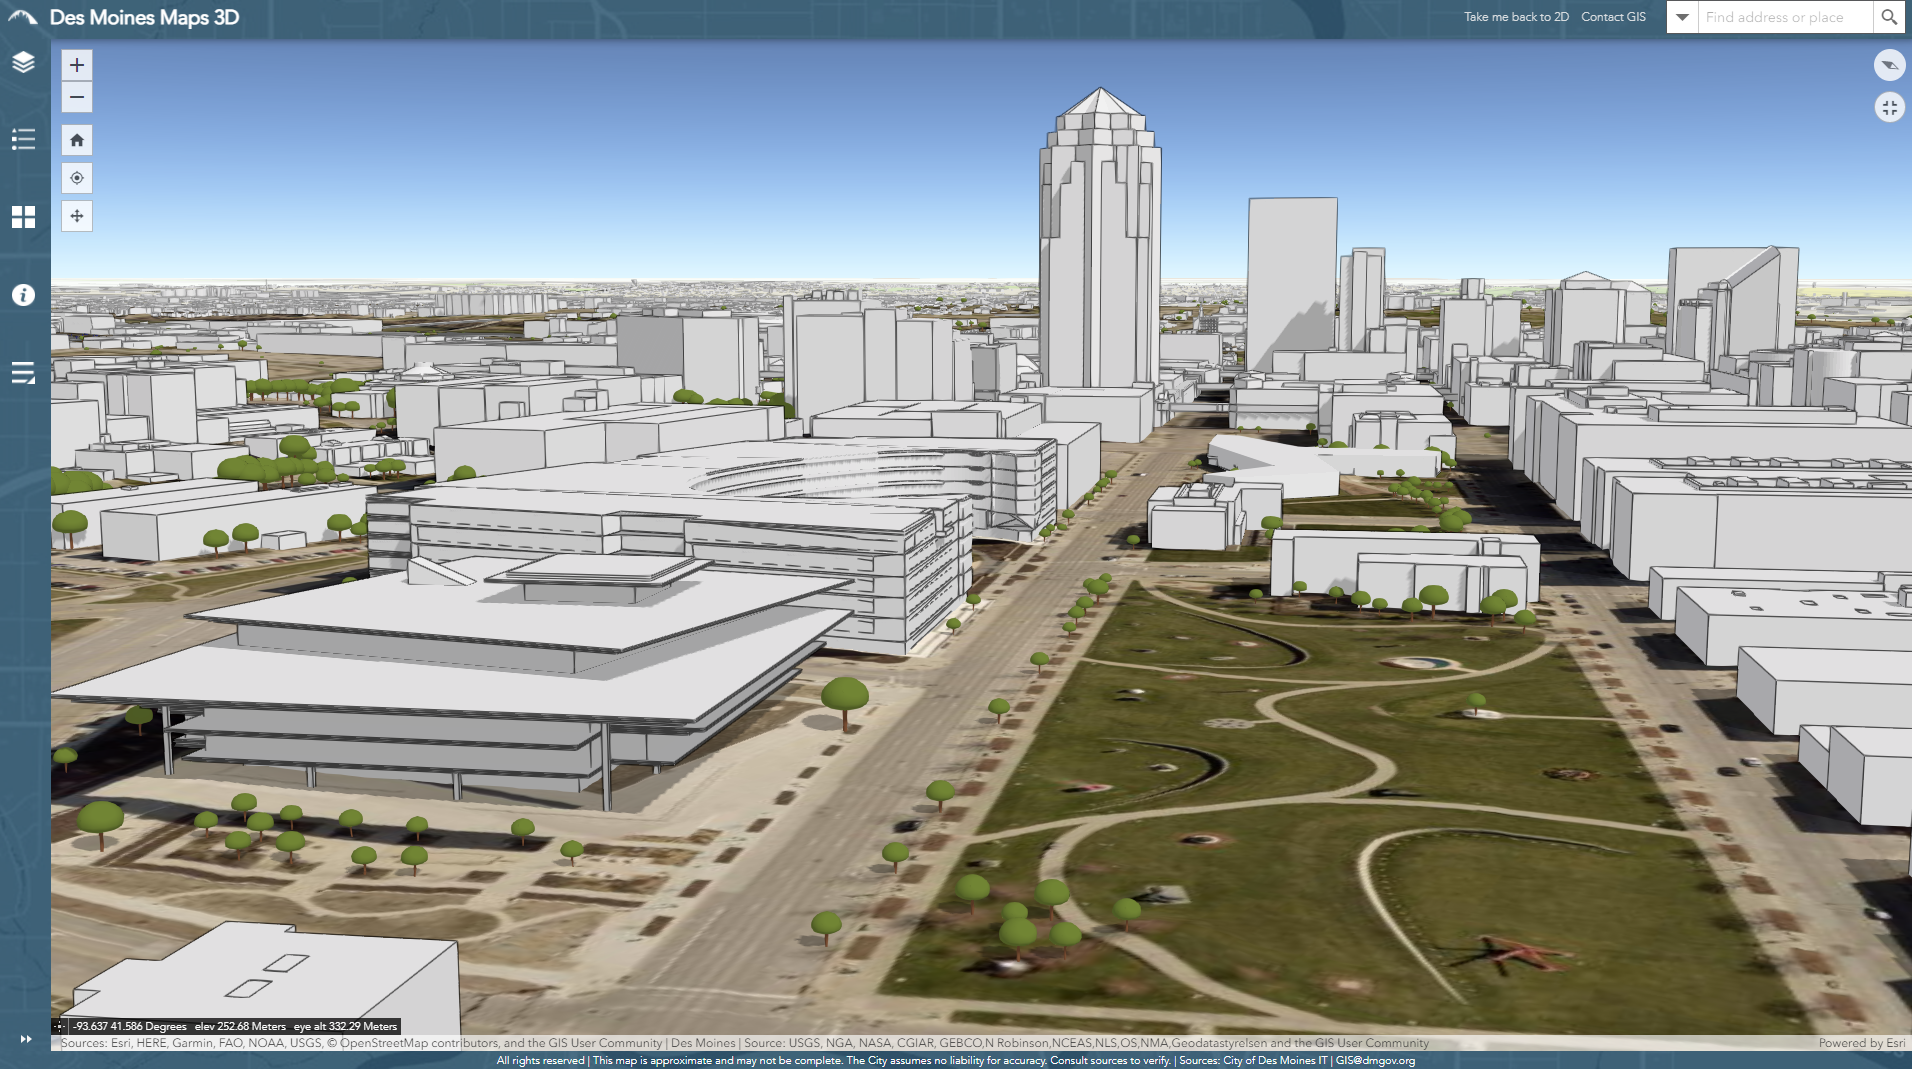 3D Gives Planners in Des Moines Clarity to Manage Economic Development,  Growth